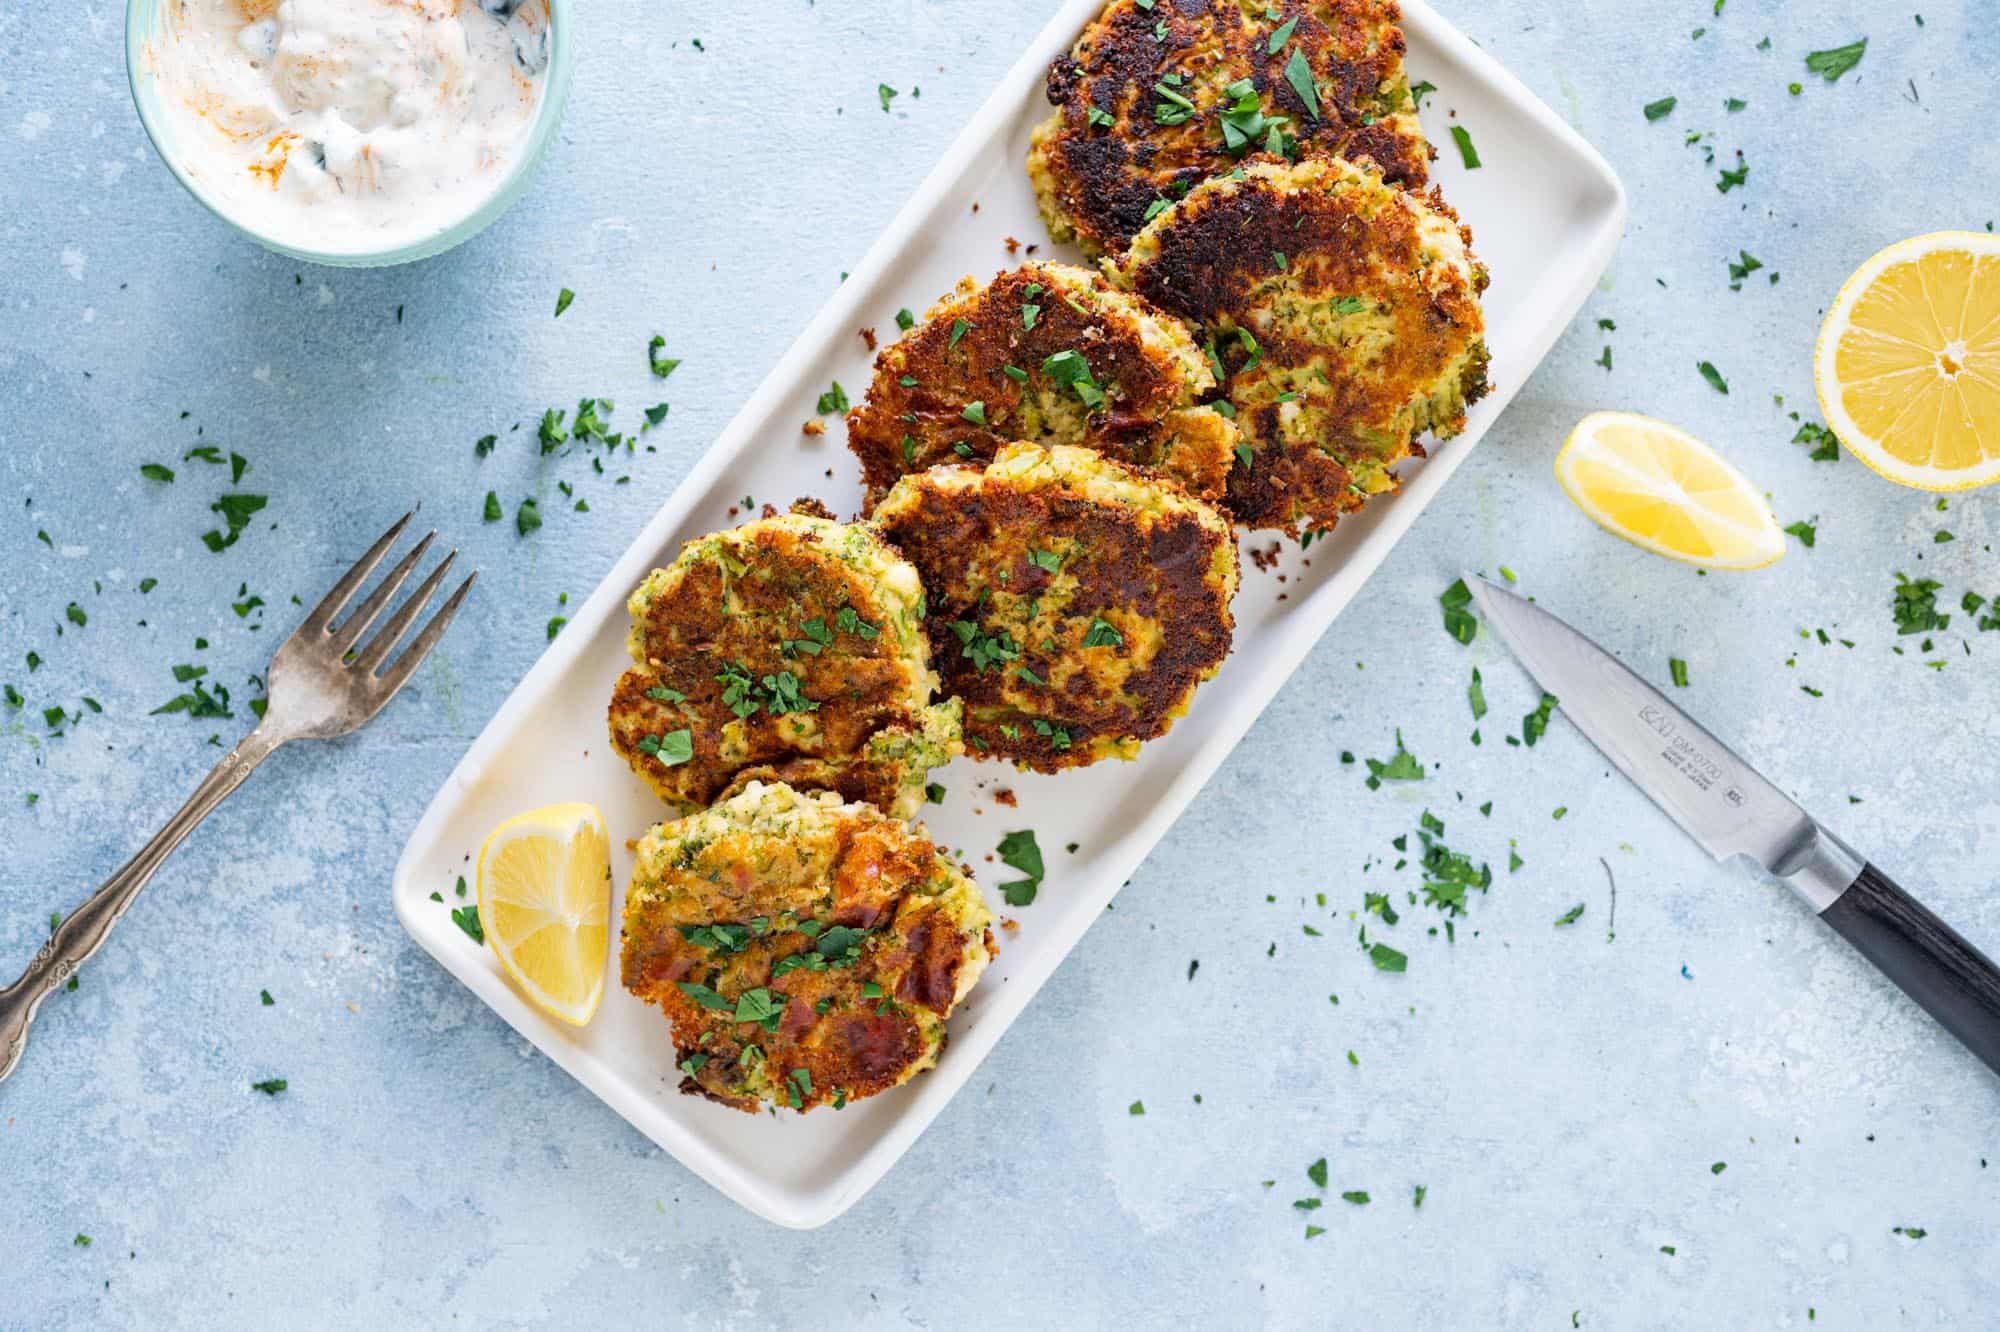 Gluten-Free Hummus Feta and Broccoli Fritters (via thepigandquill.com) #gameday #snack #vegetarian #lunchbox